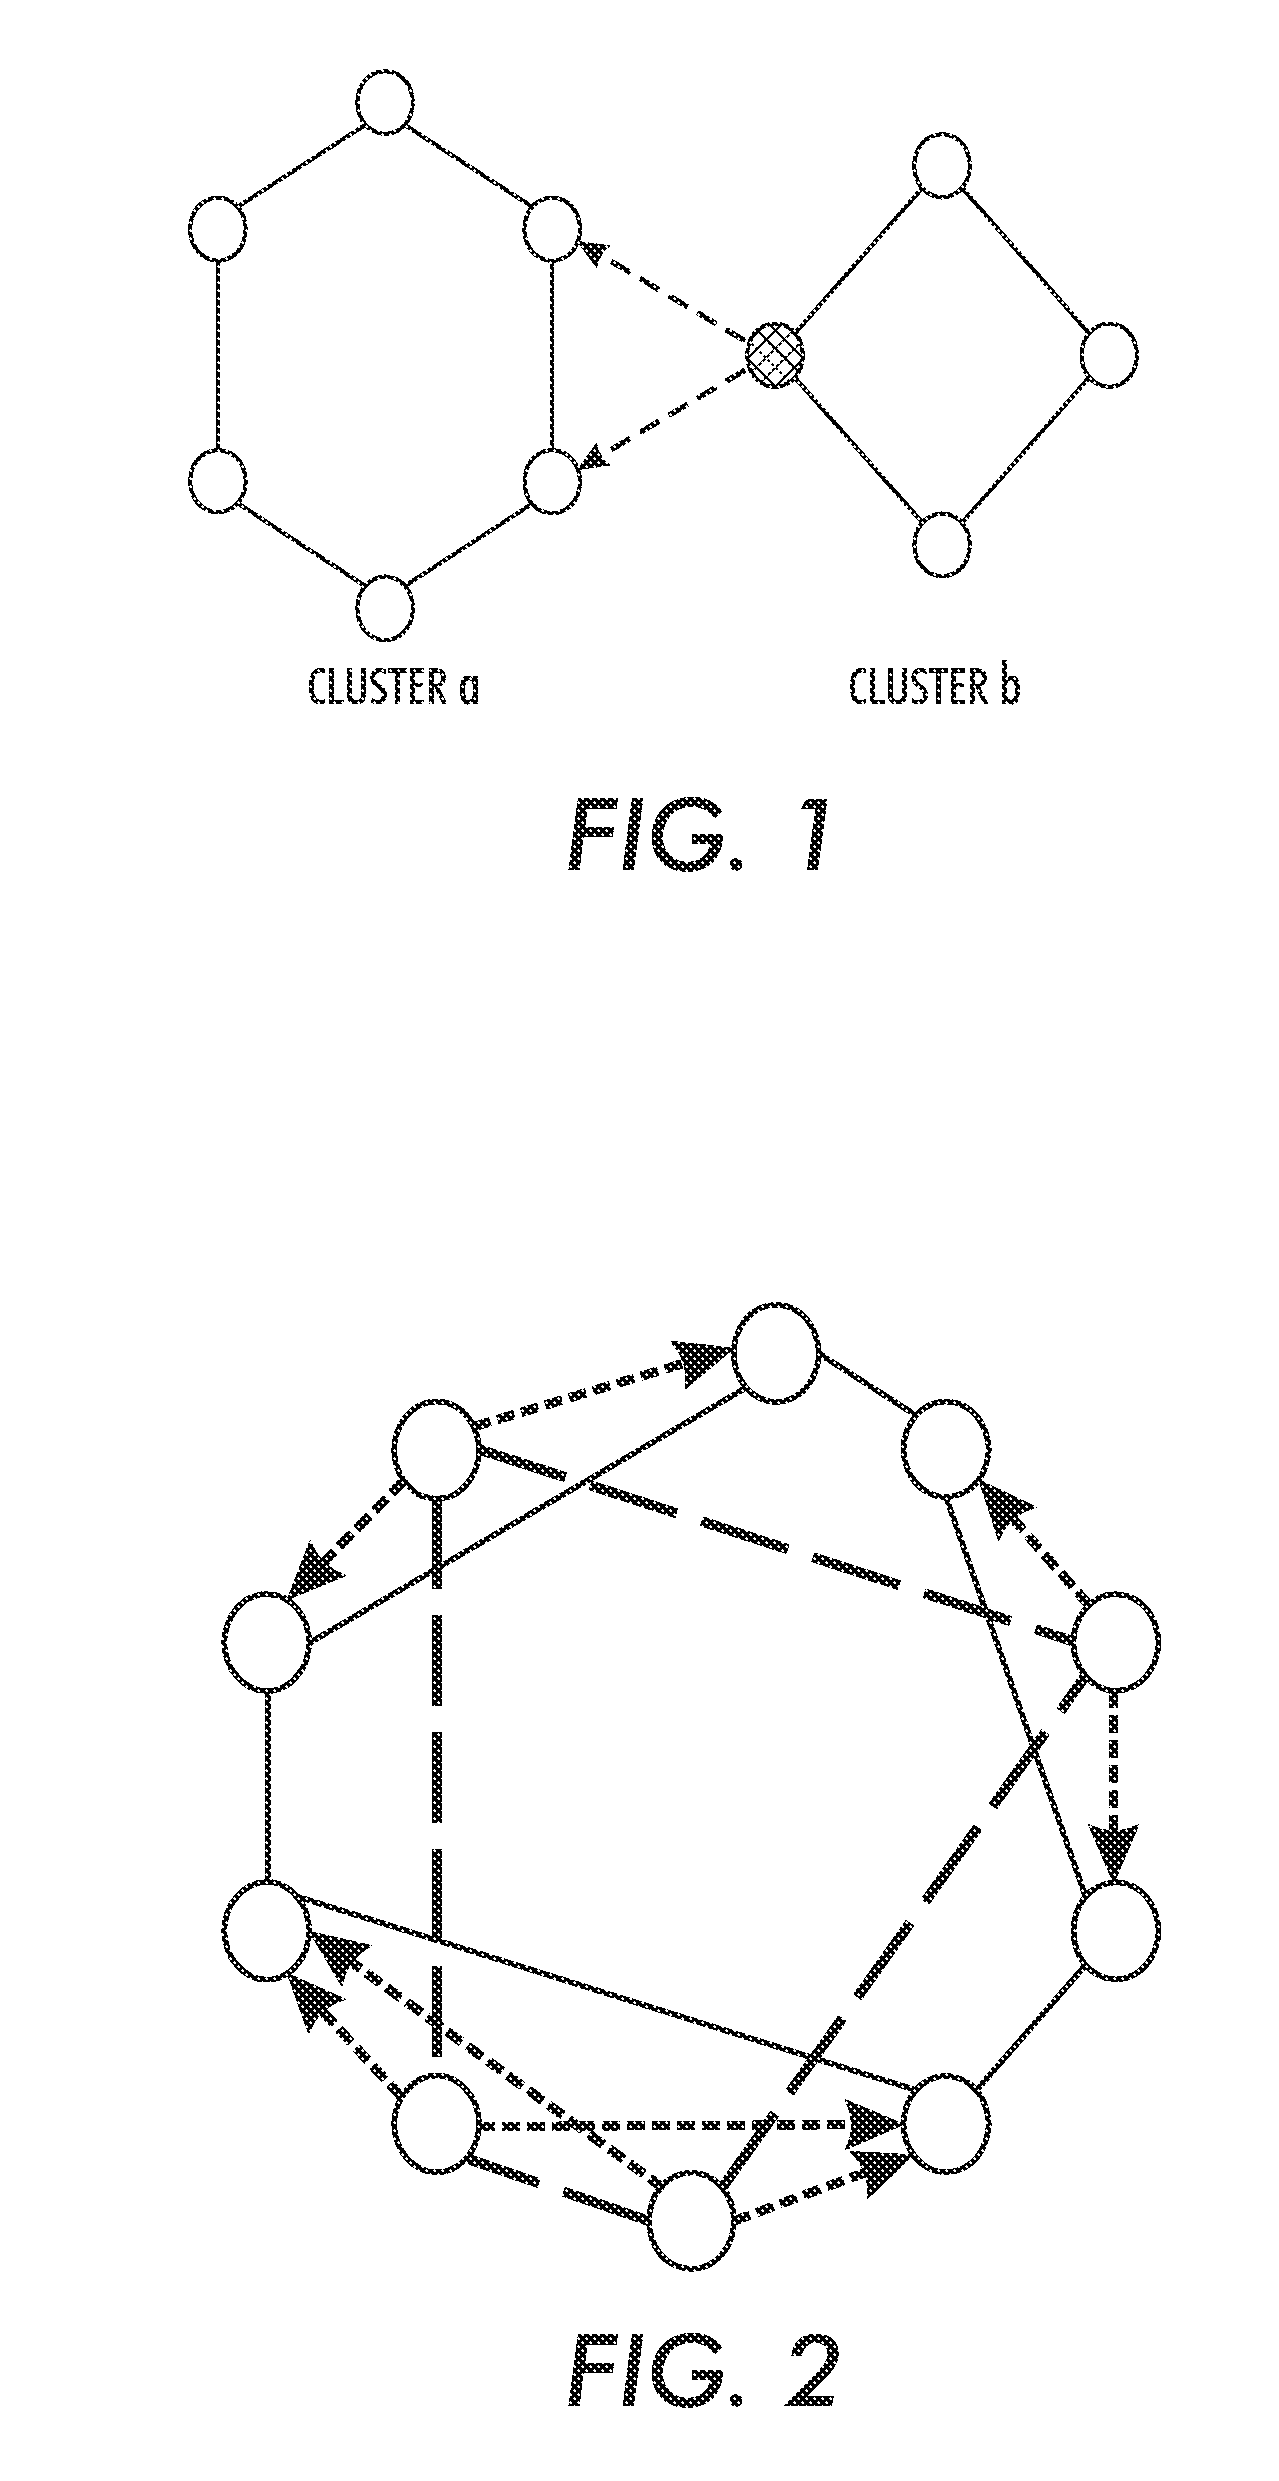 Two-level structured overlay design for cluster management in a peer-to-peer network